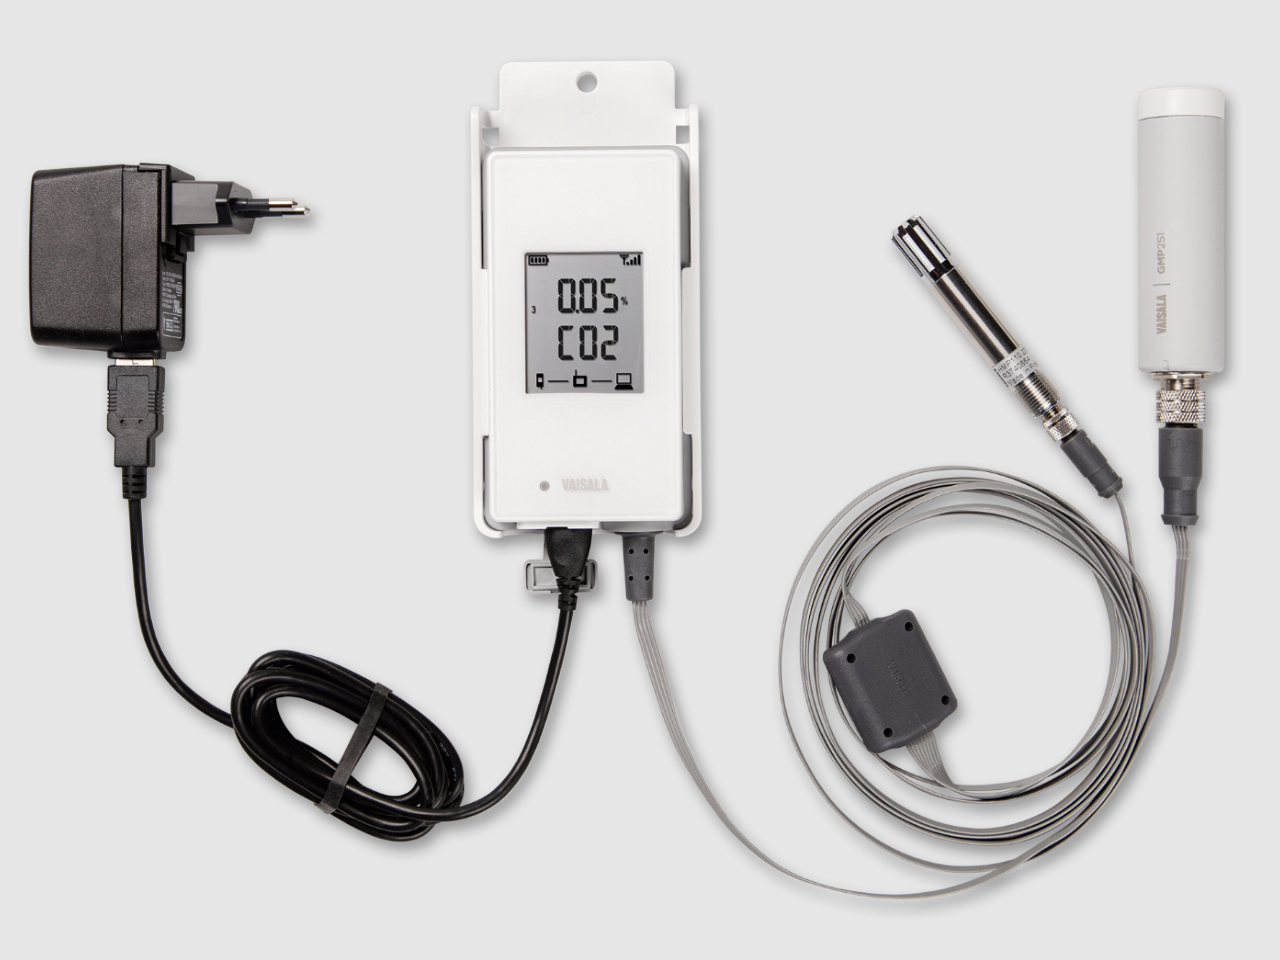 RFL100 logger with the probes GMP251 and HMP110, power cable